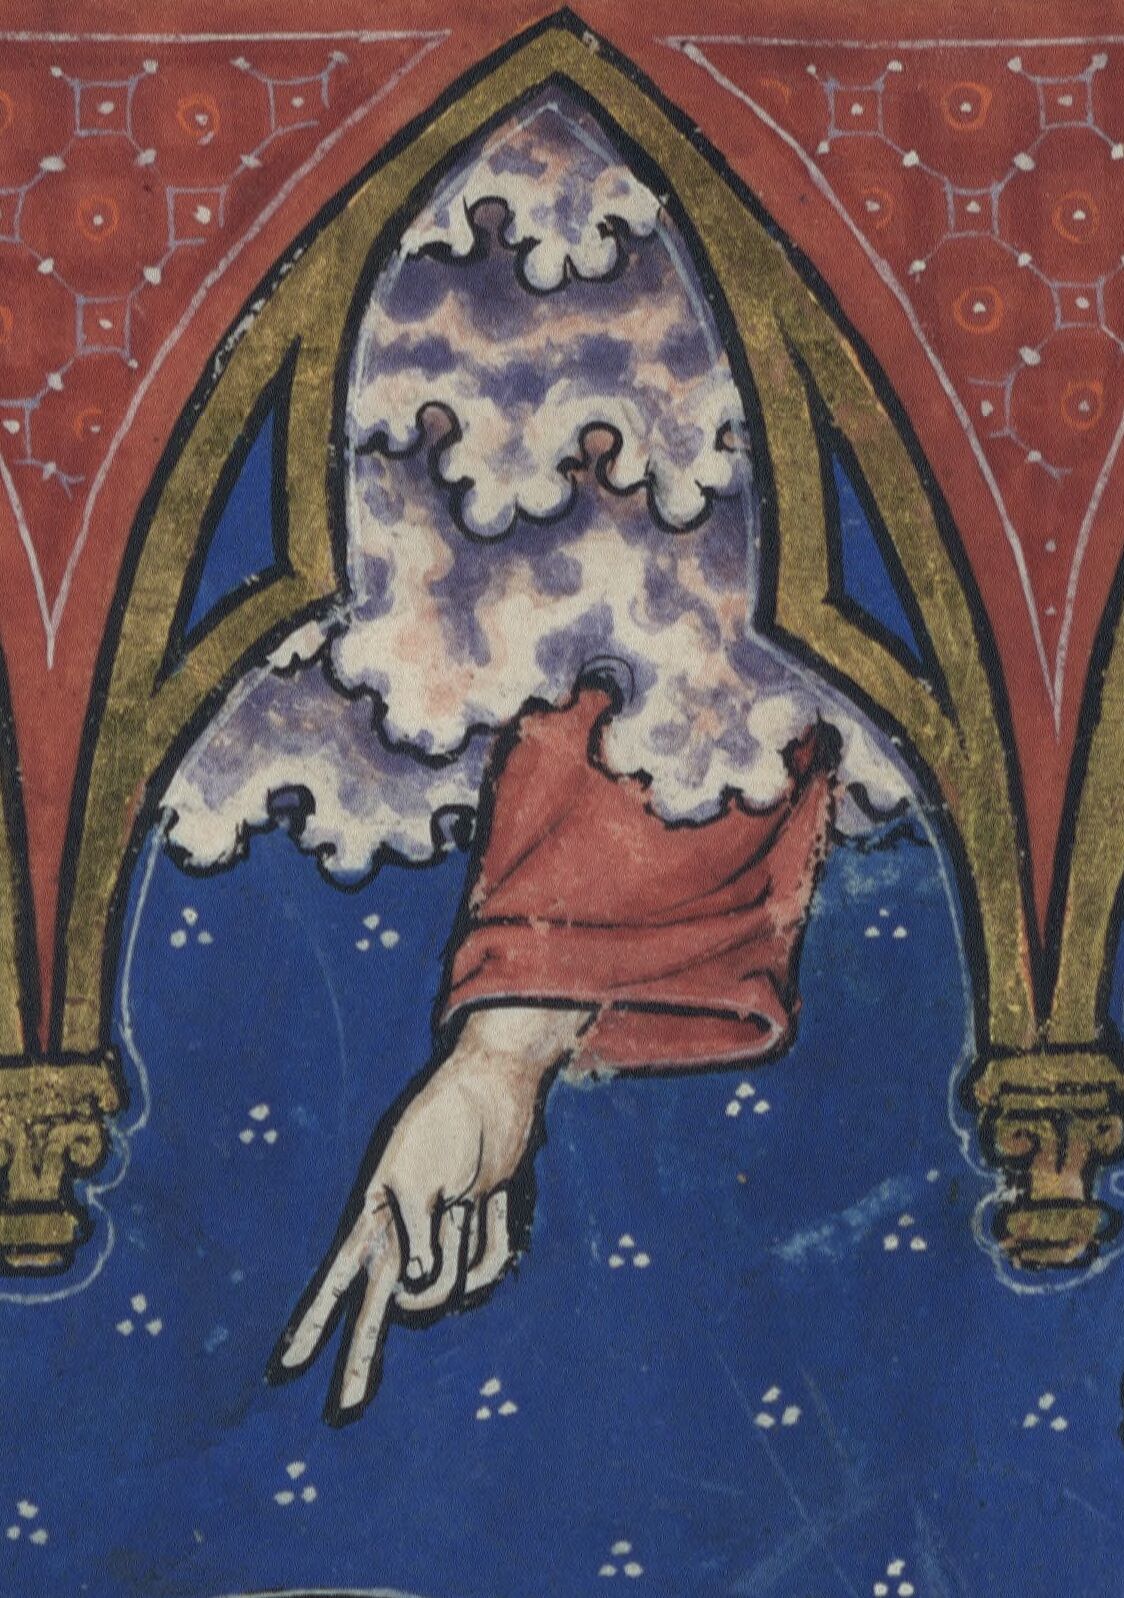 The hand of God